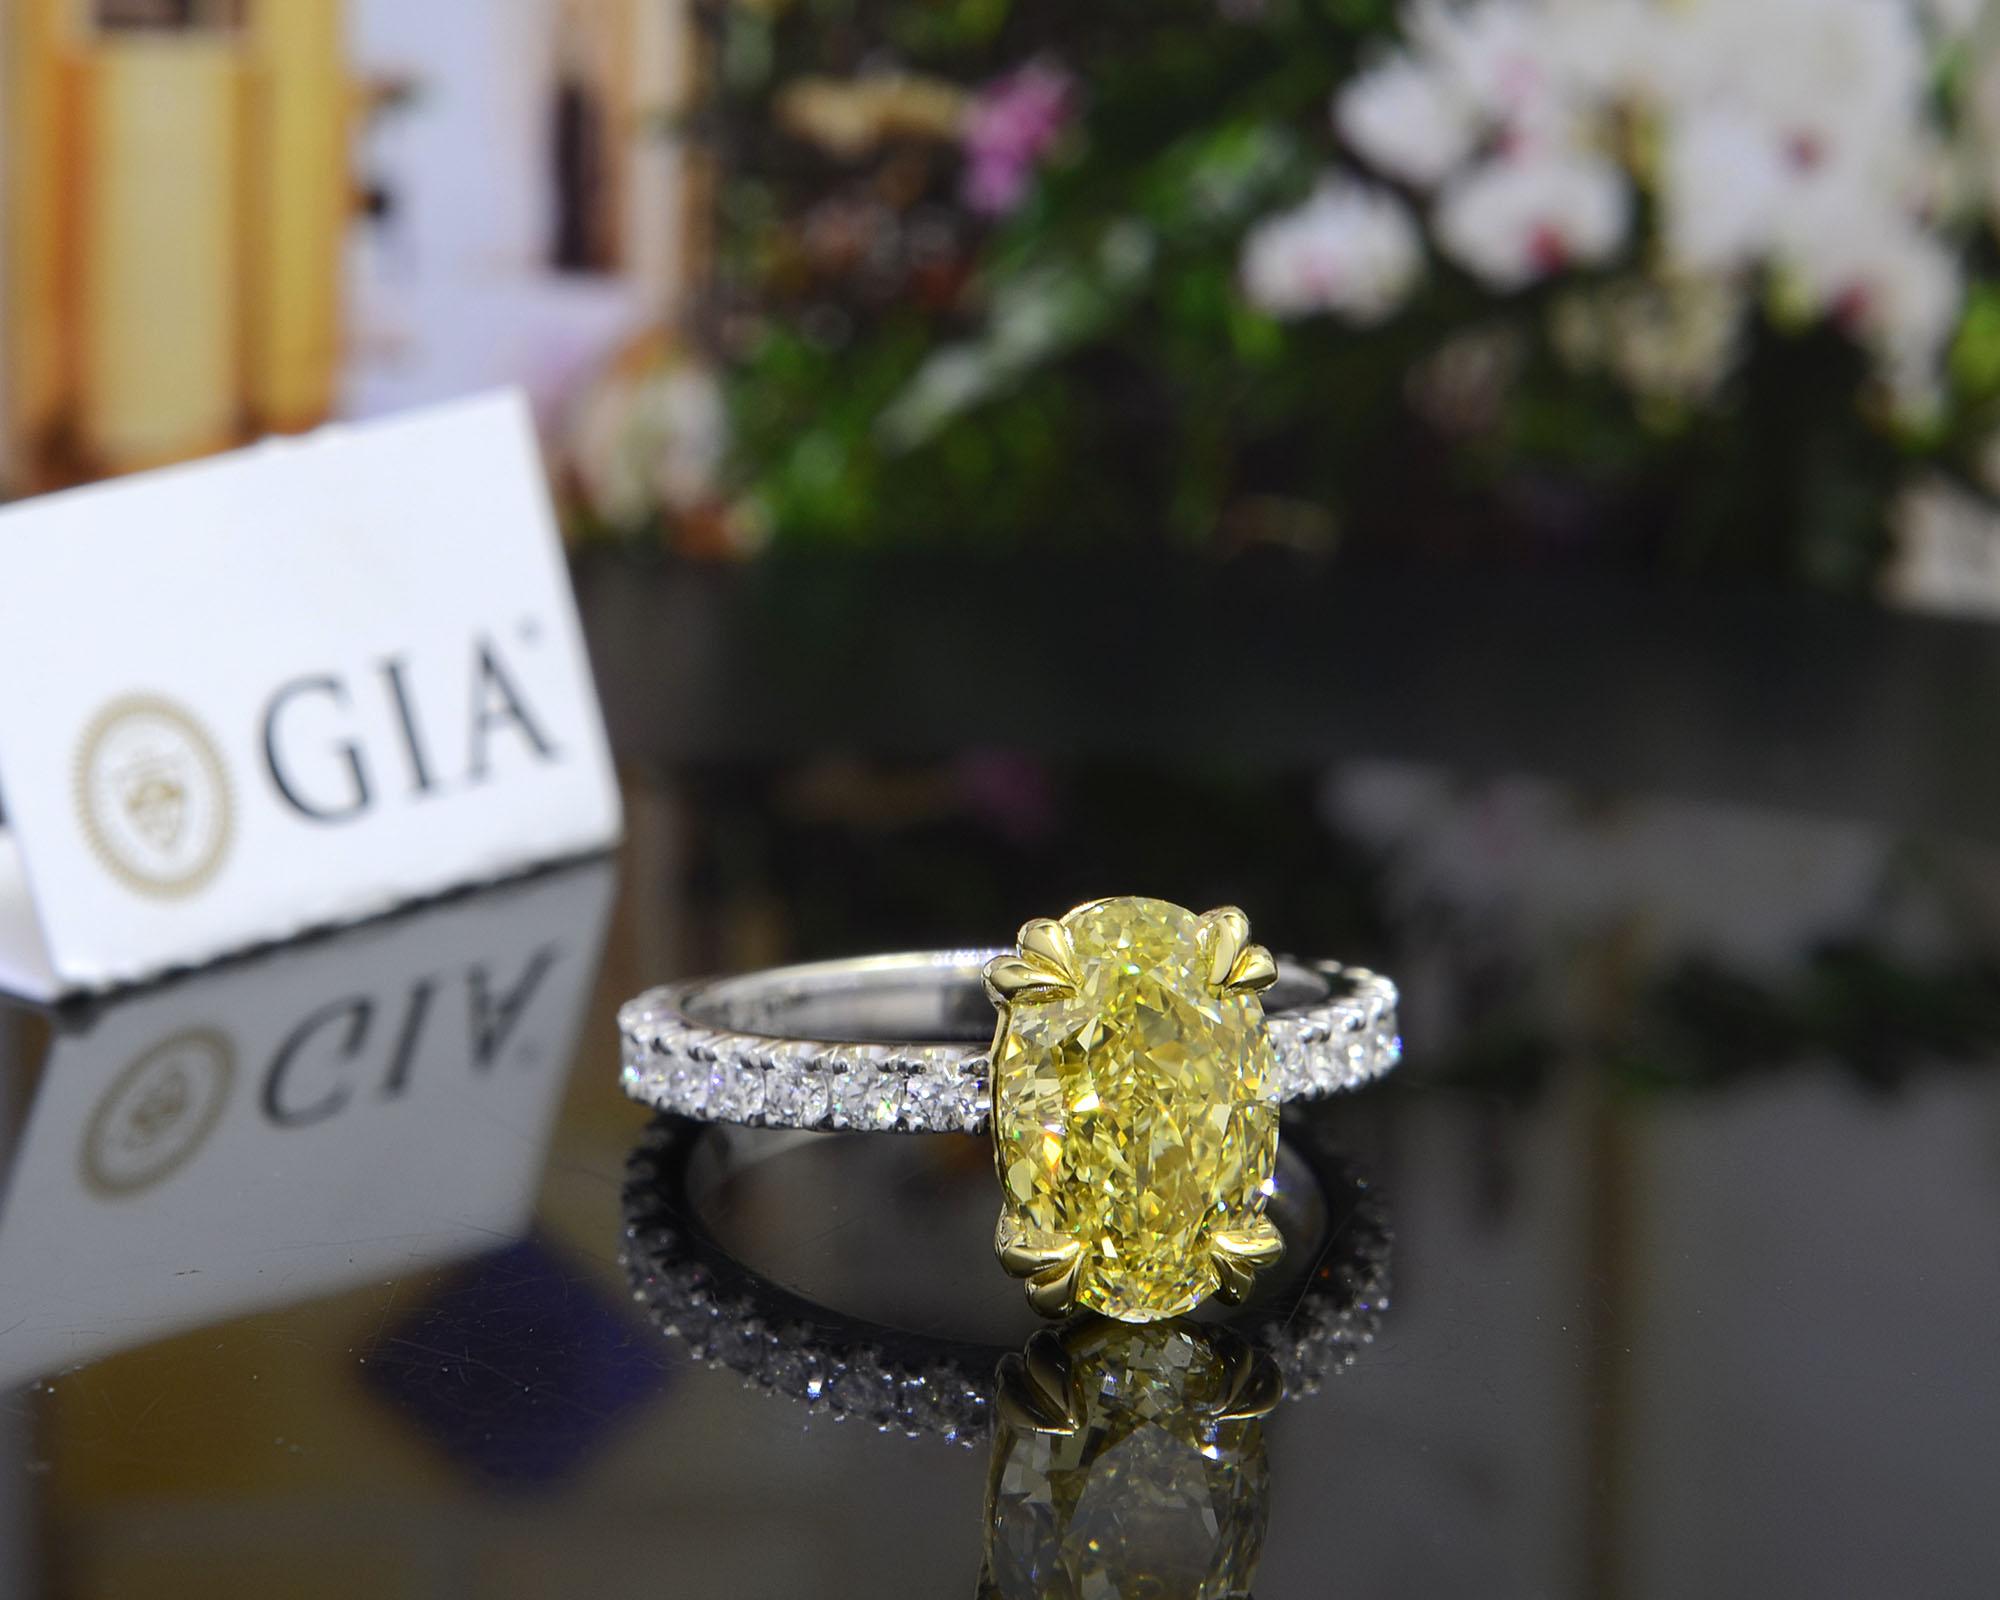 This lovely canary diamond engagement ring features a 3.00 Ct. natural fancy light yellow oval cut diamond with Internally Flawless clarity. Surrounding the center gem and all around the shank are 0.70 Ct. of round cut diamonds in U-Pave setting.